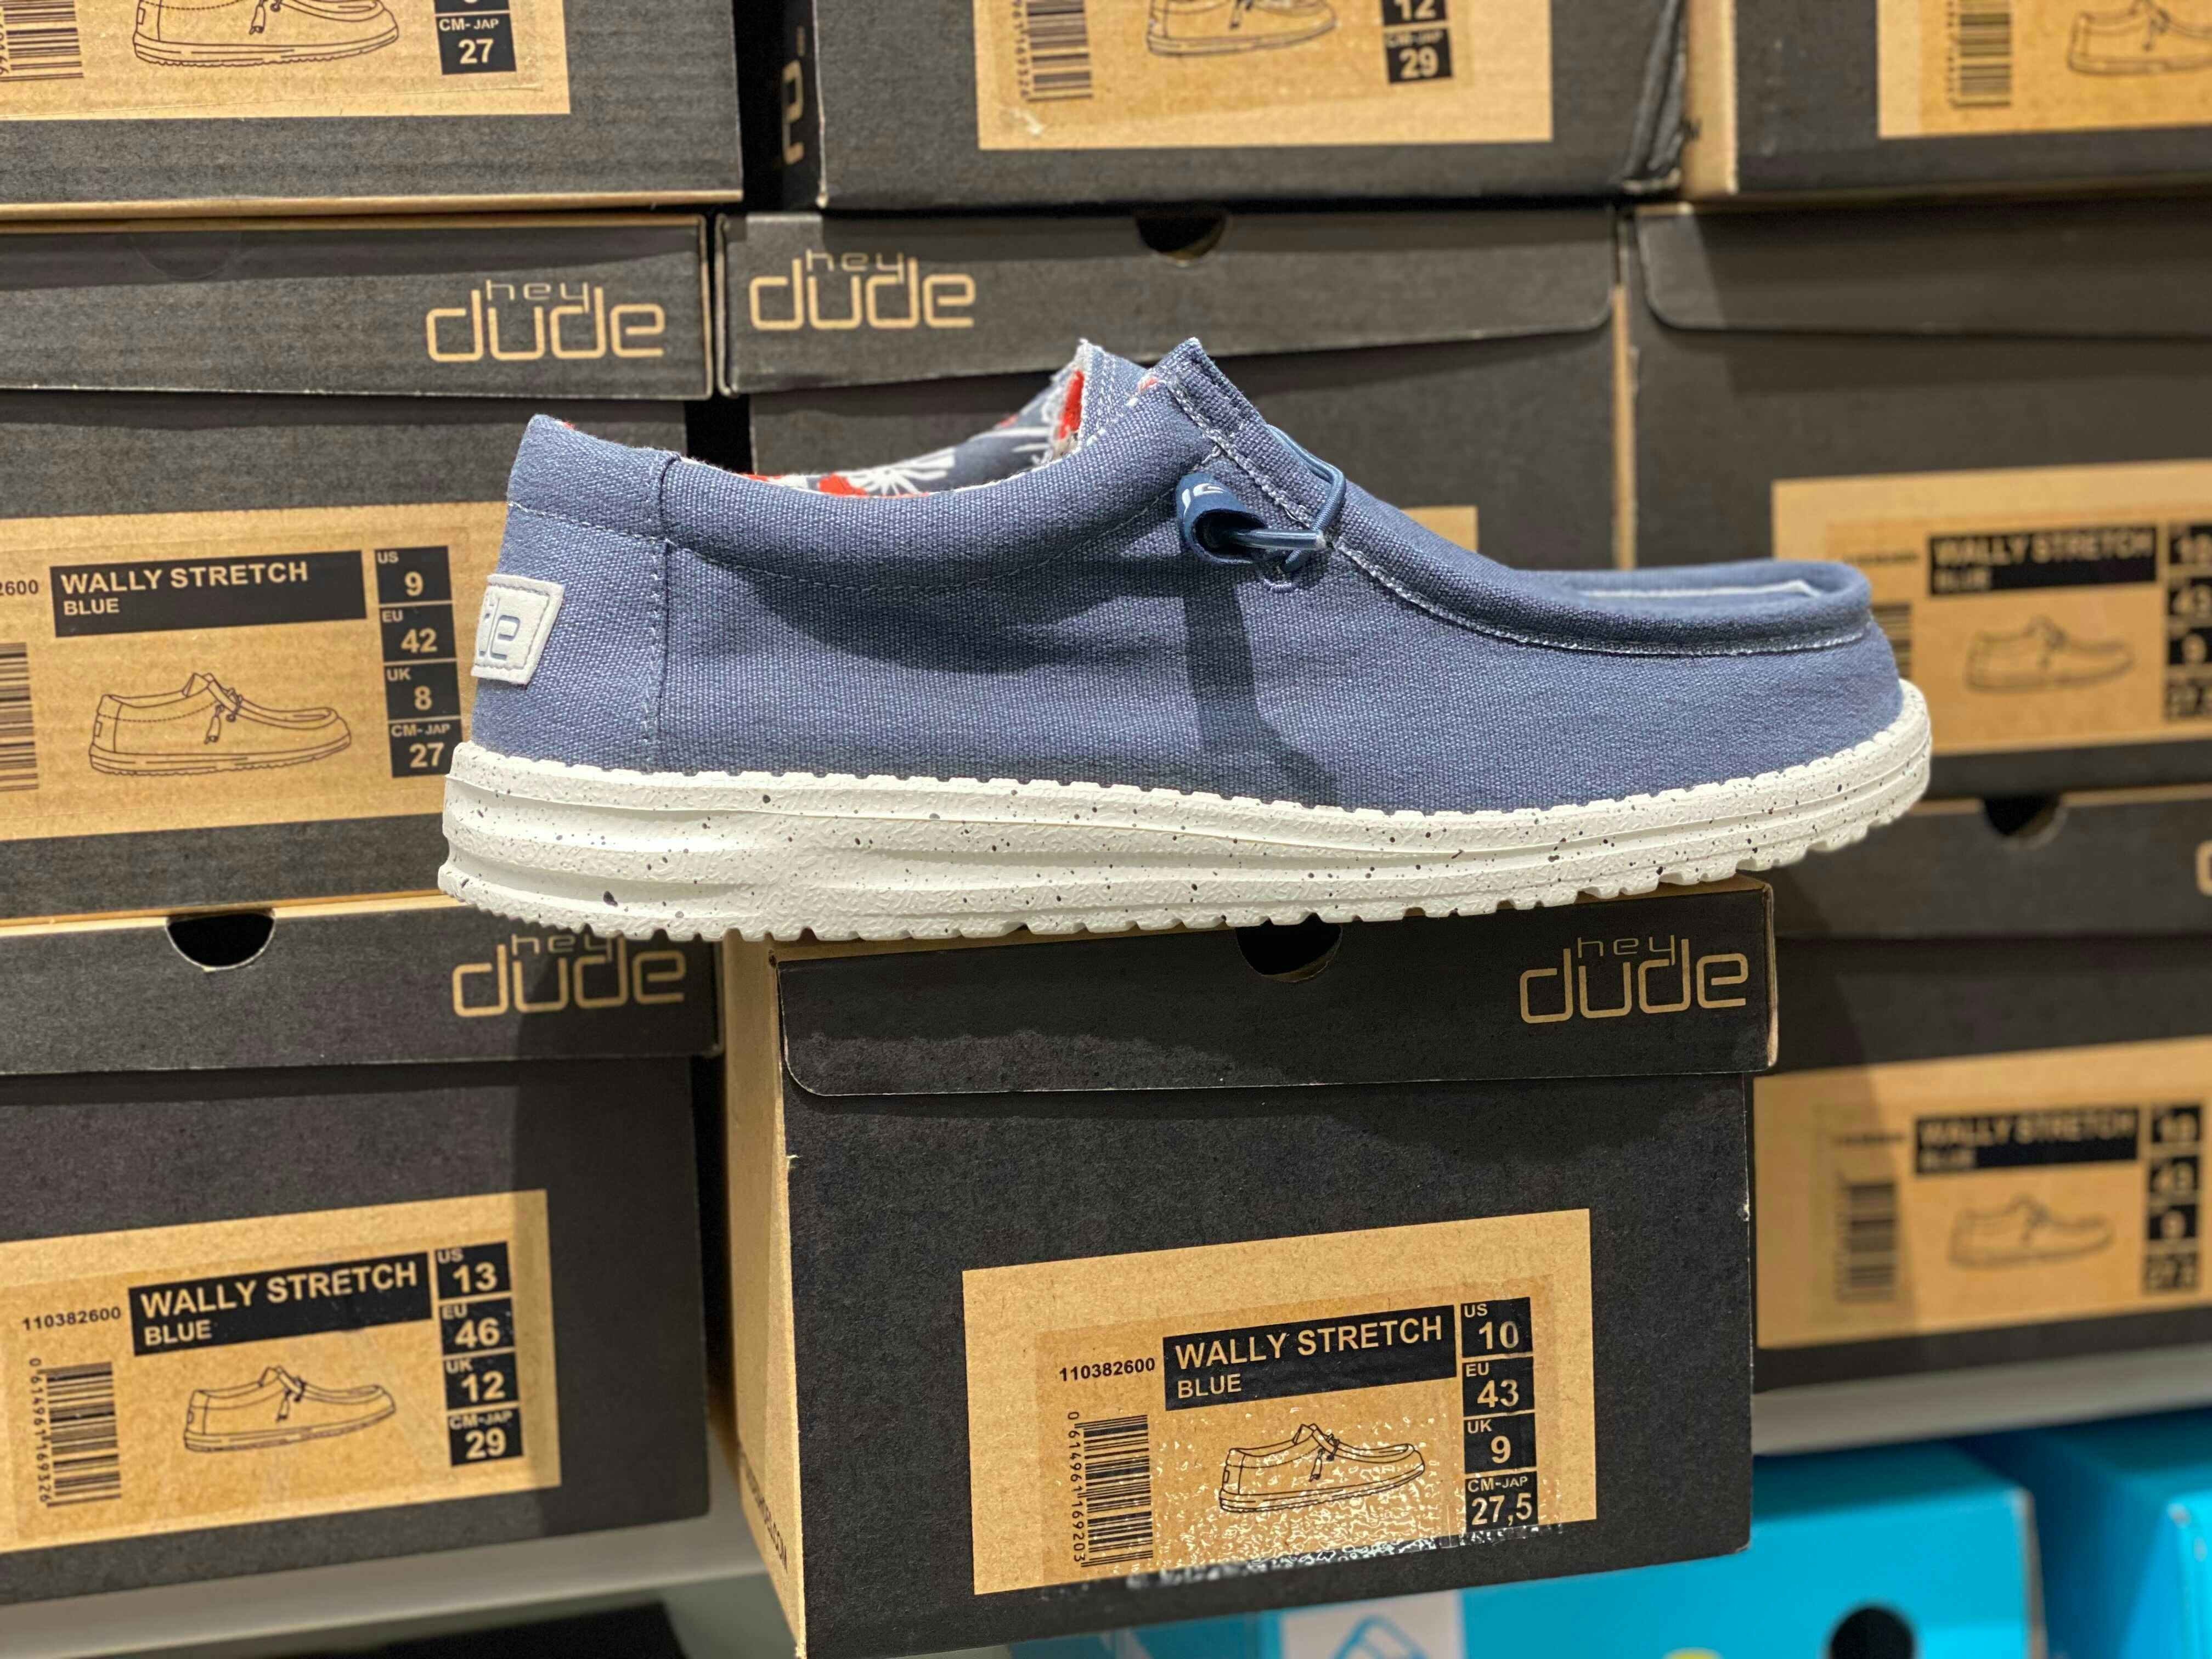 A dark blue Hey Dude shoe in front of a stack of shoe boxes in a store.